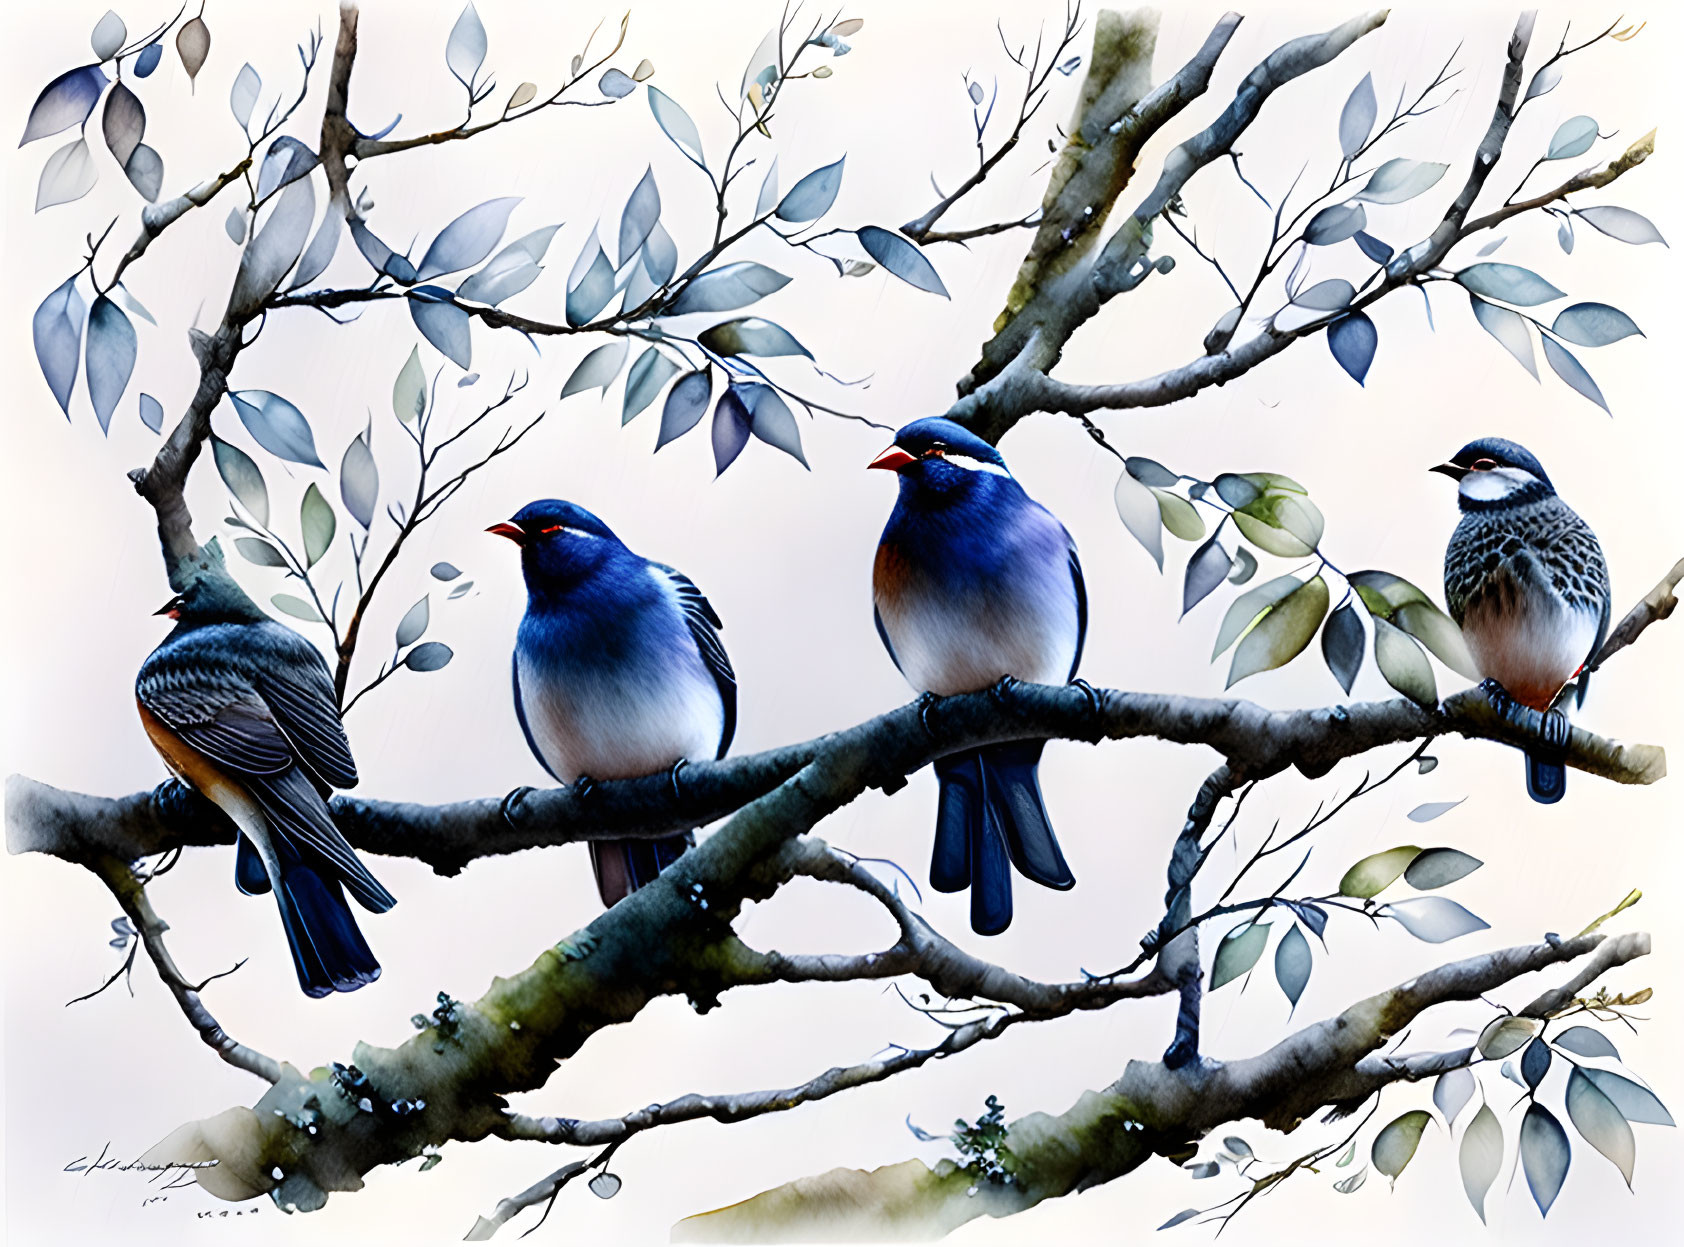 Vibrant birds on leafy branches in light setting